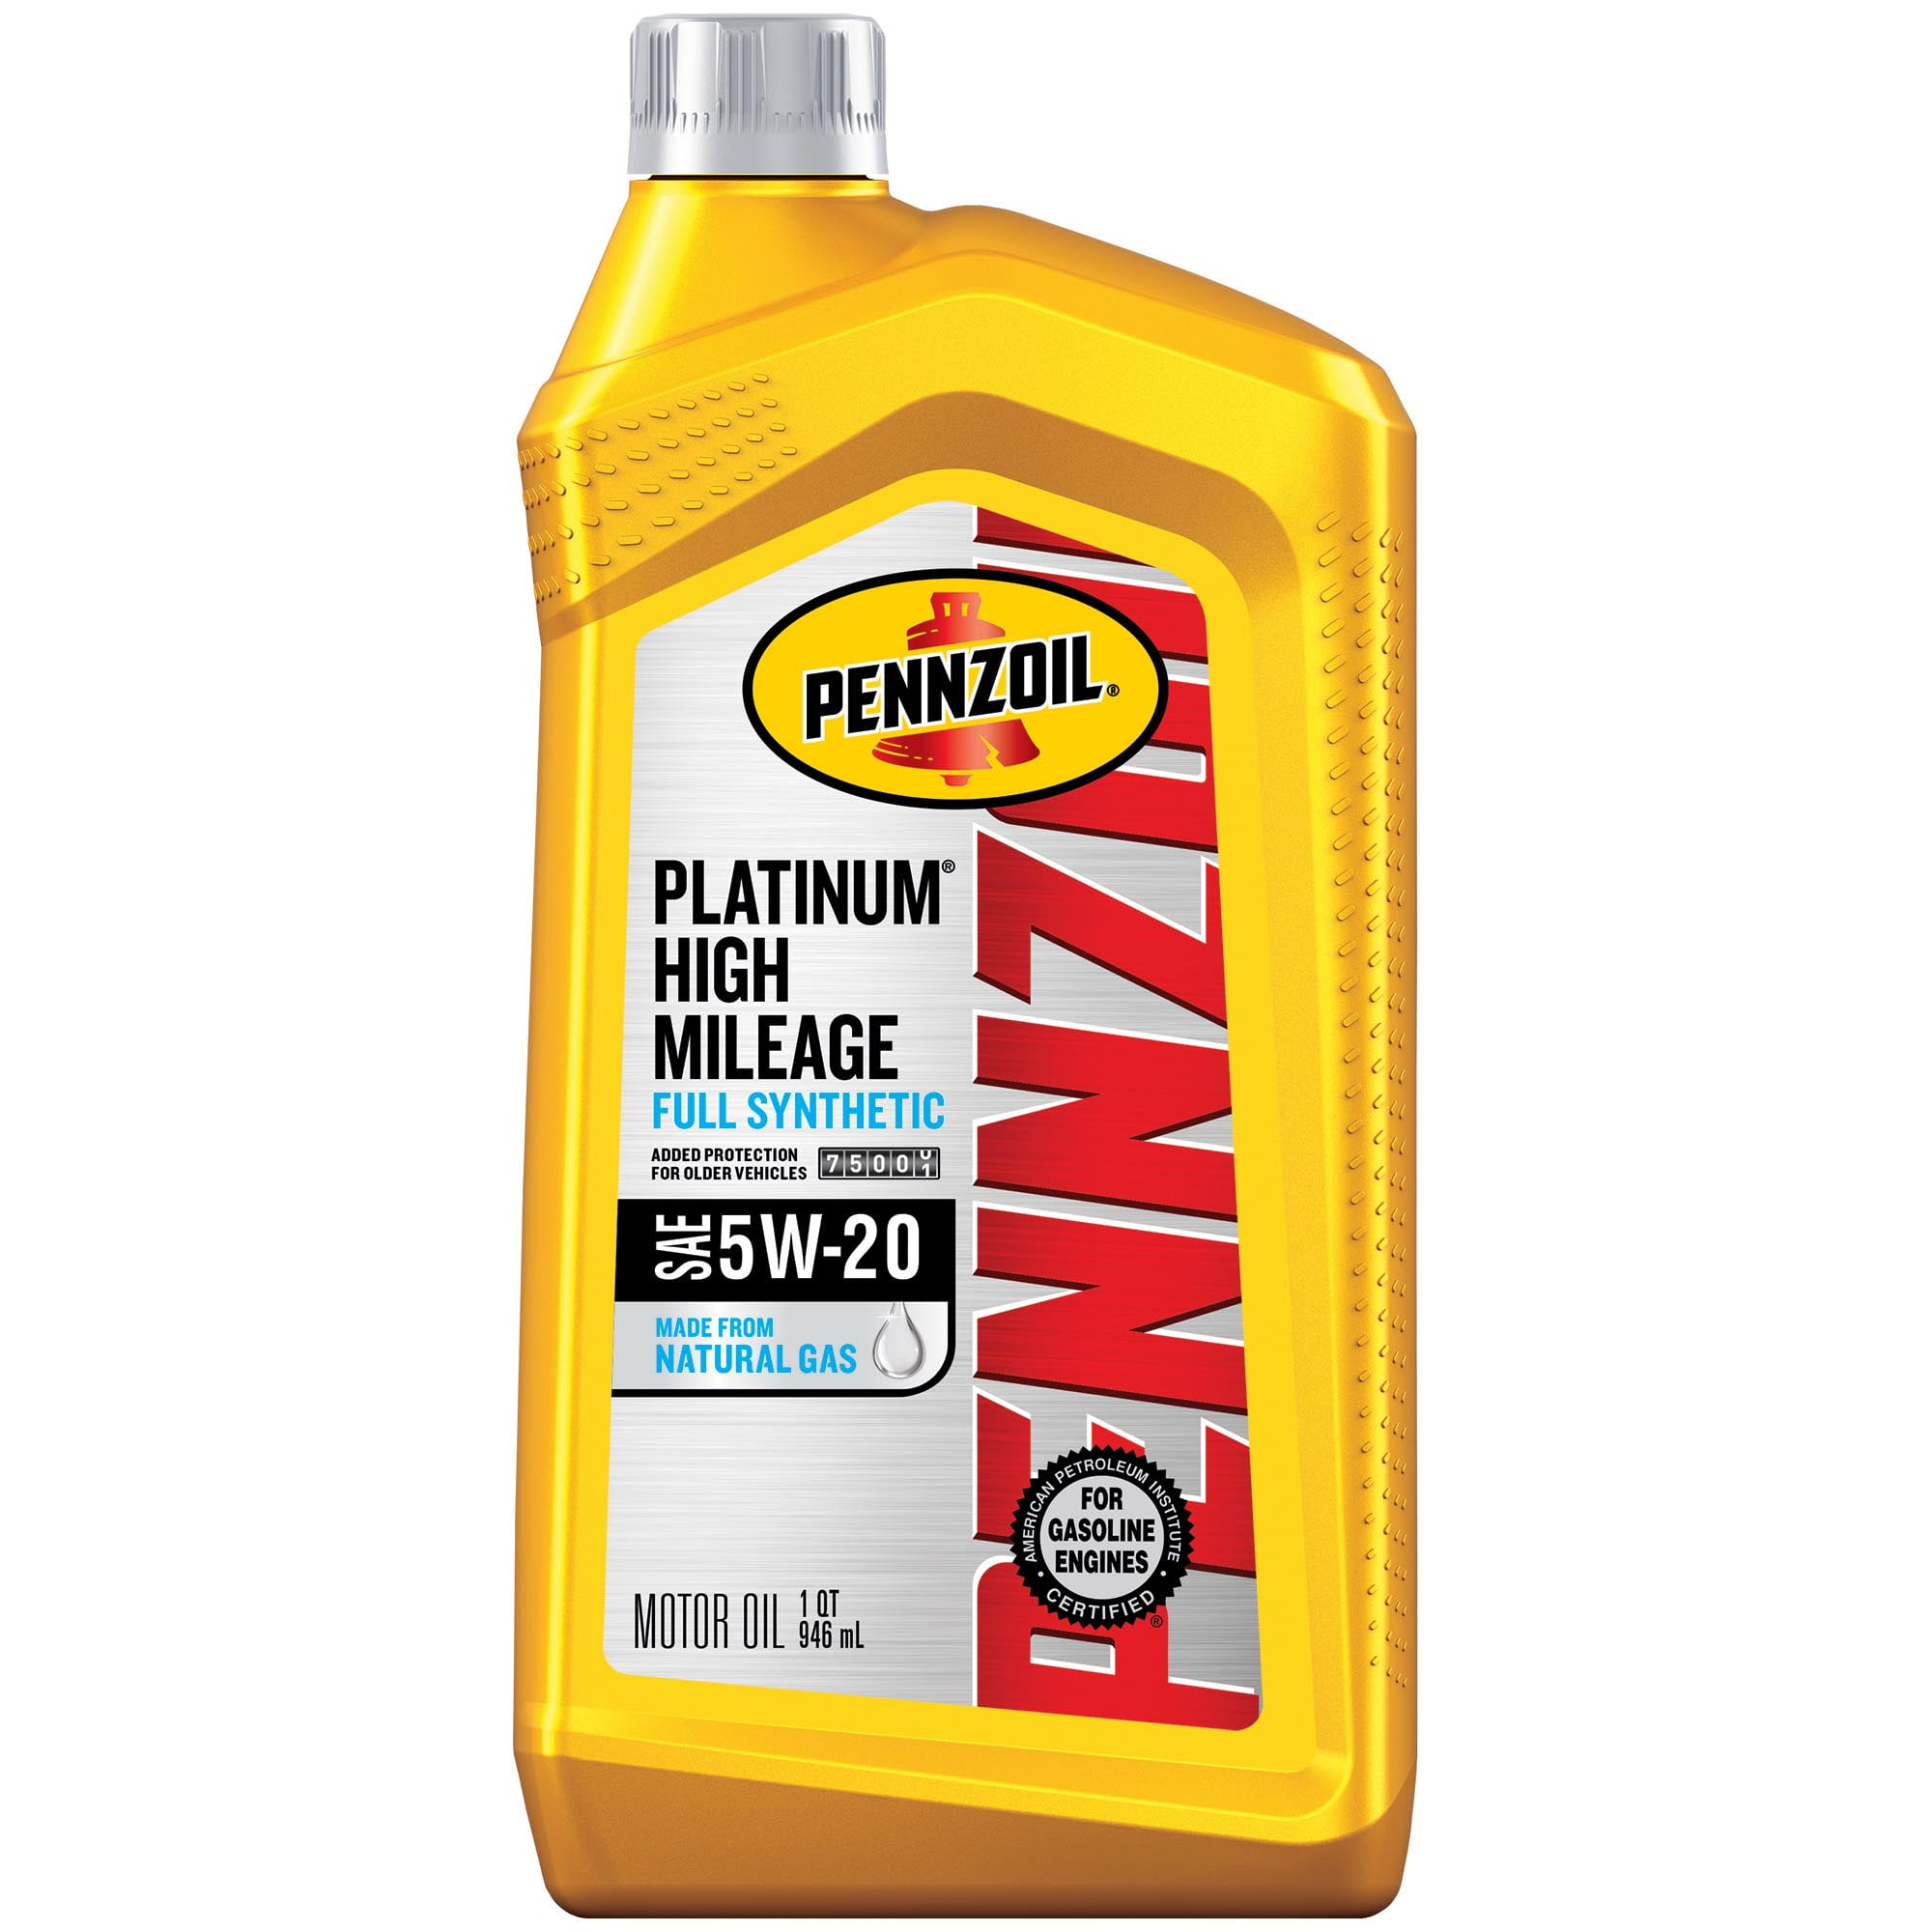 Pennzoil Platinum High Mileage 5w 20 Full Synthetic Motor Oil 1